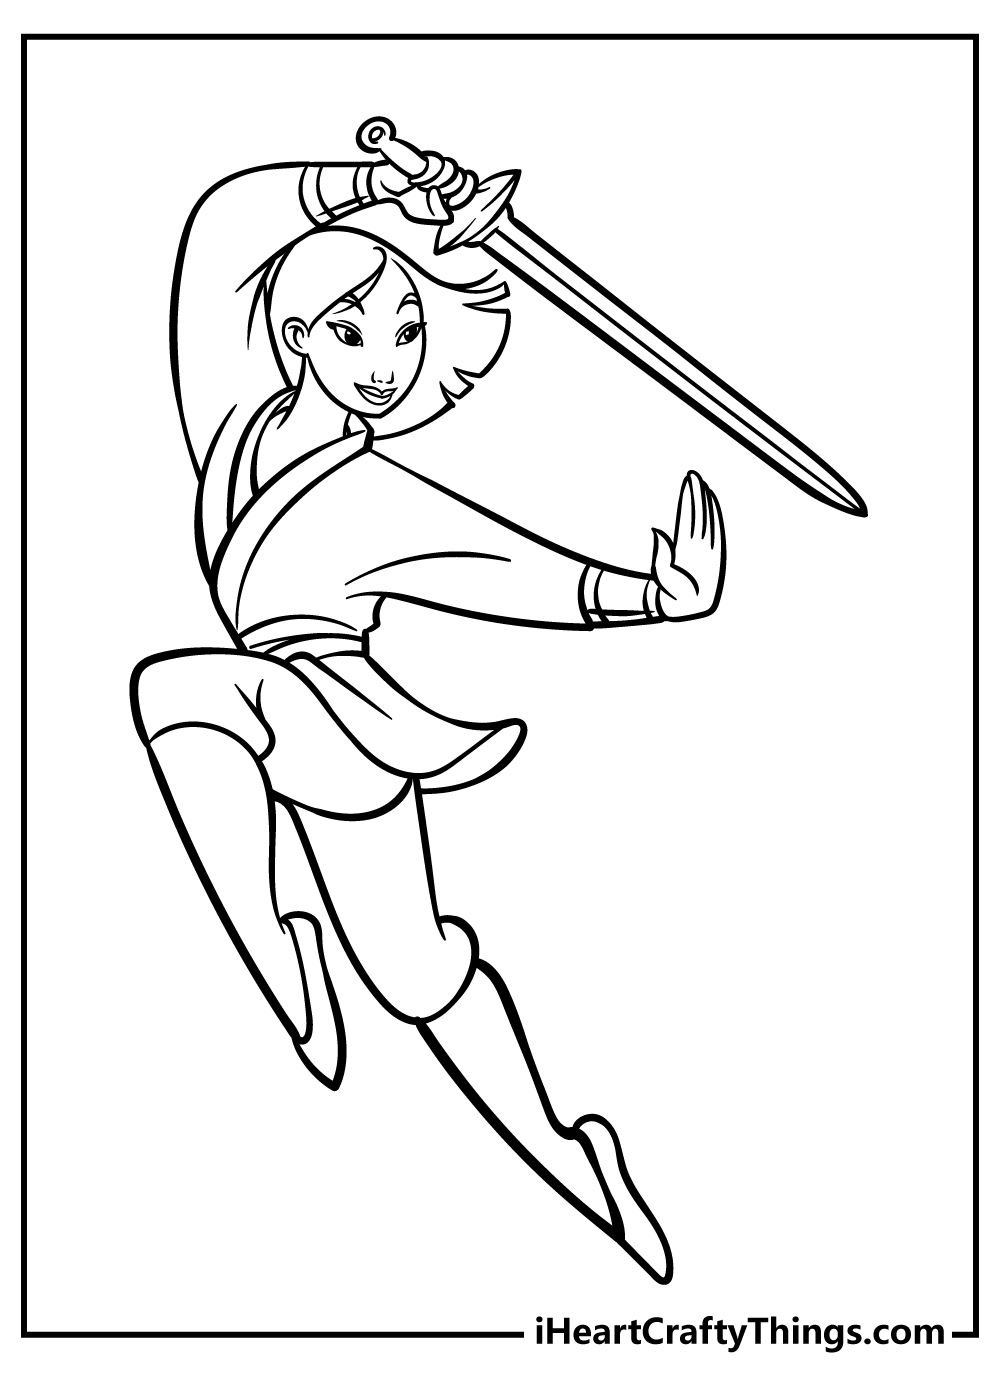 Mulan Coloring Pages for adults free printable